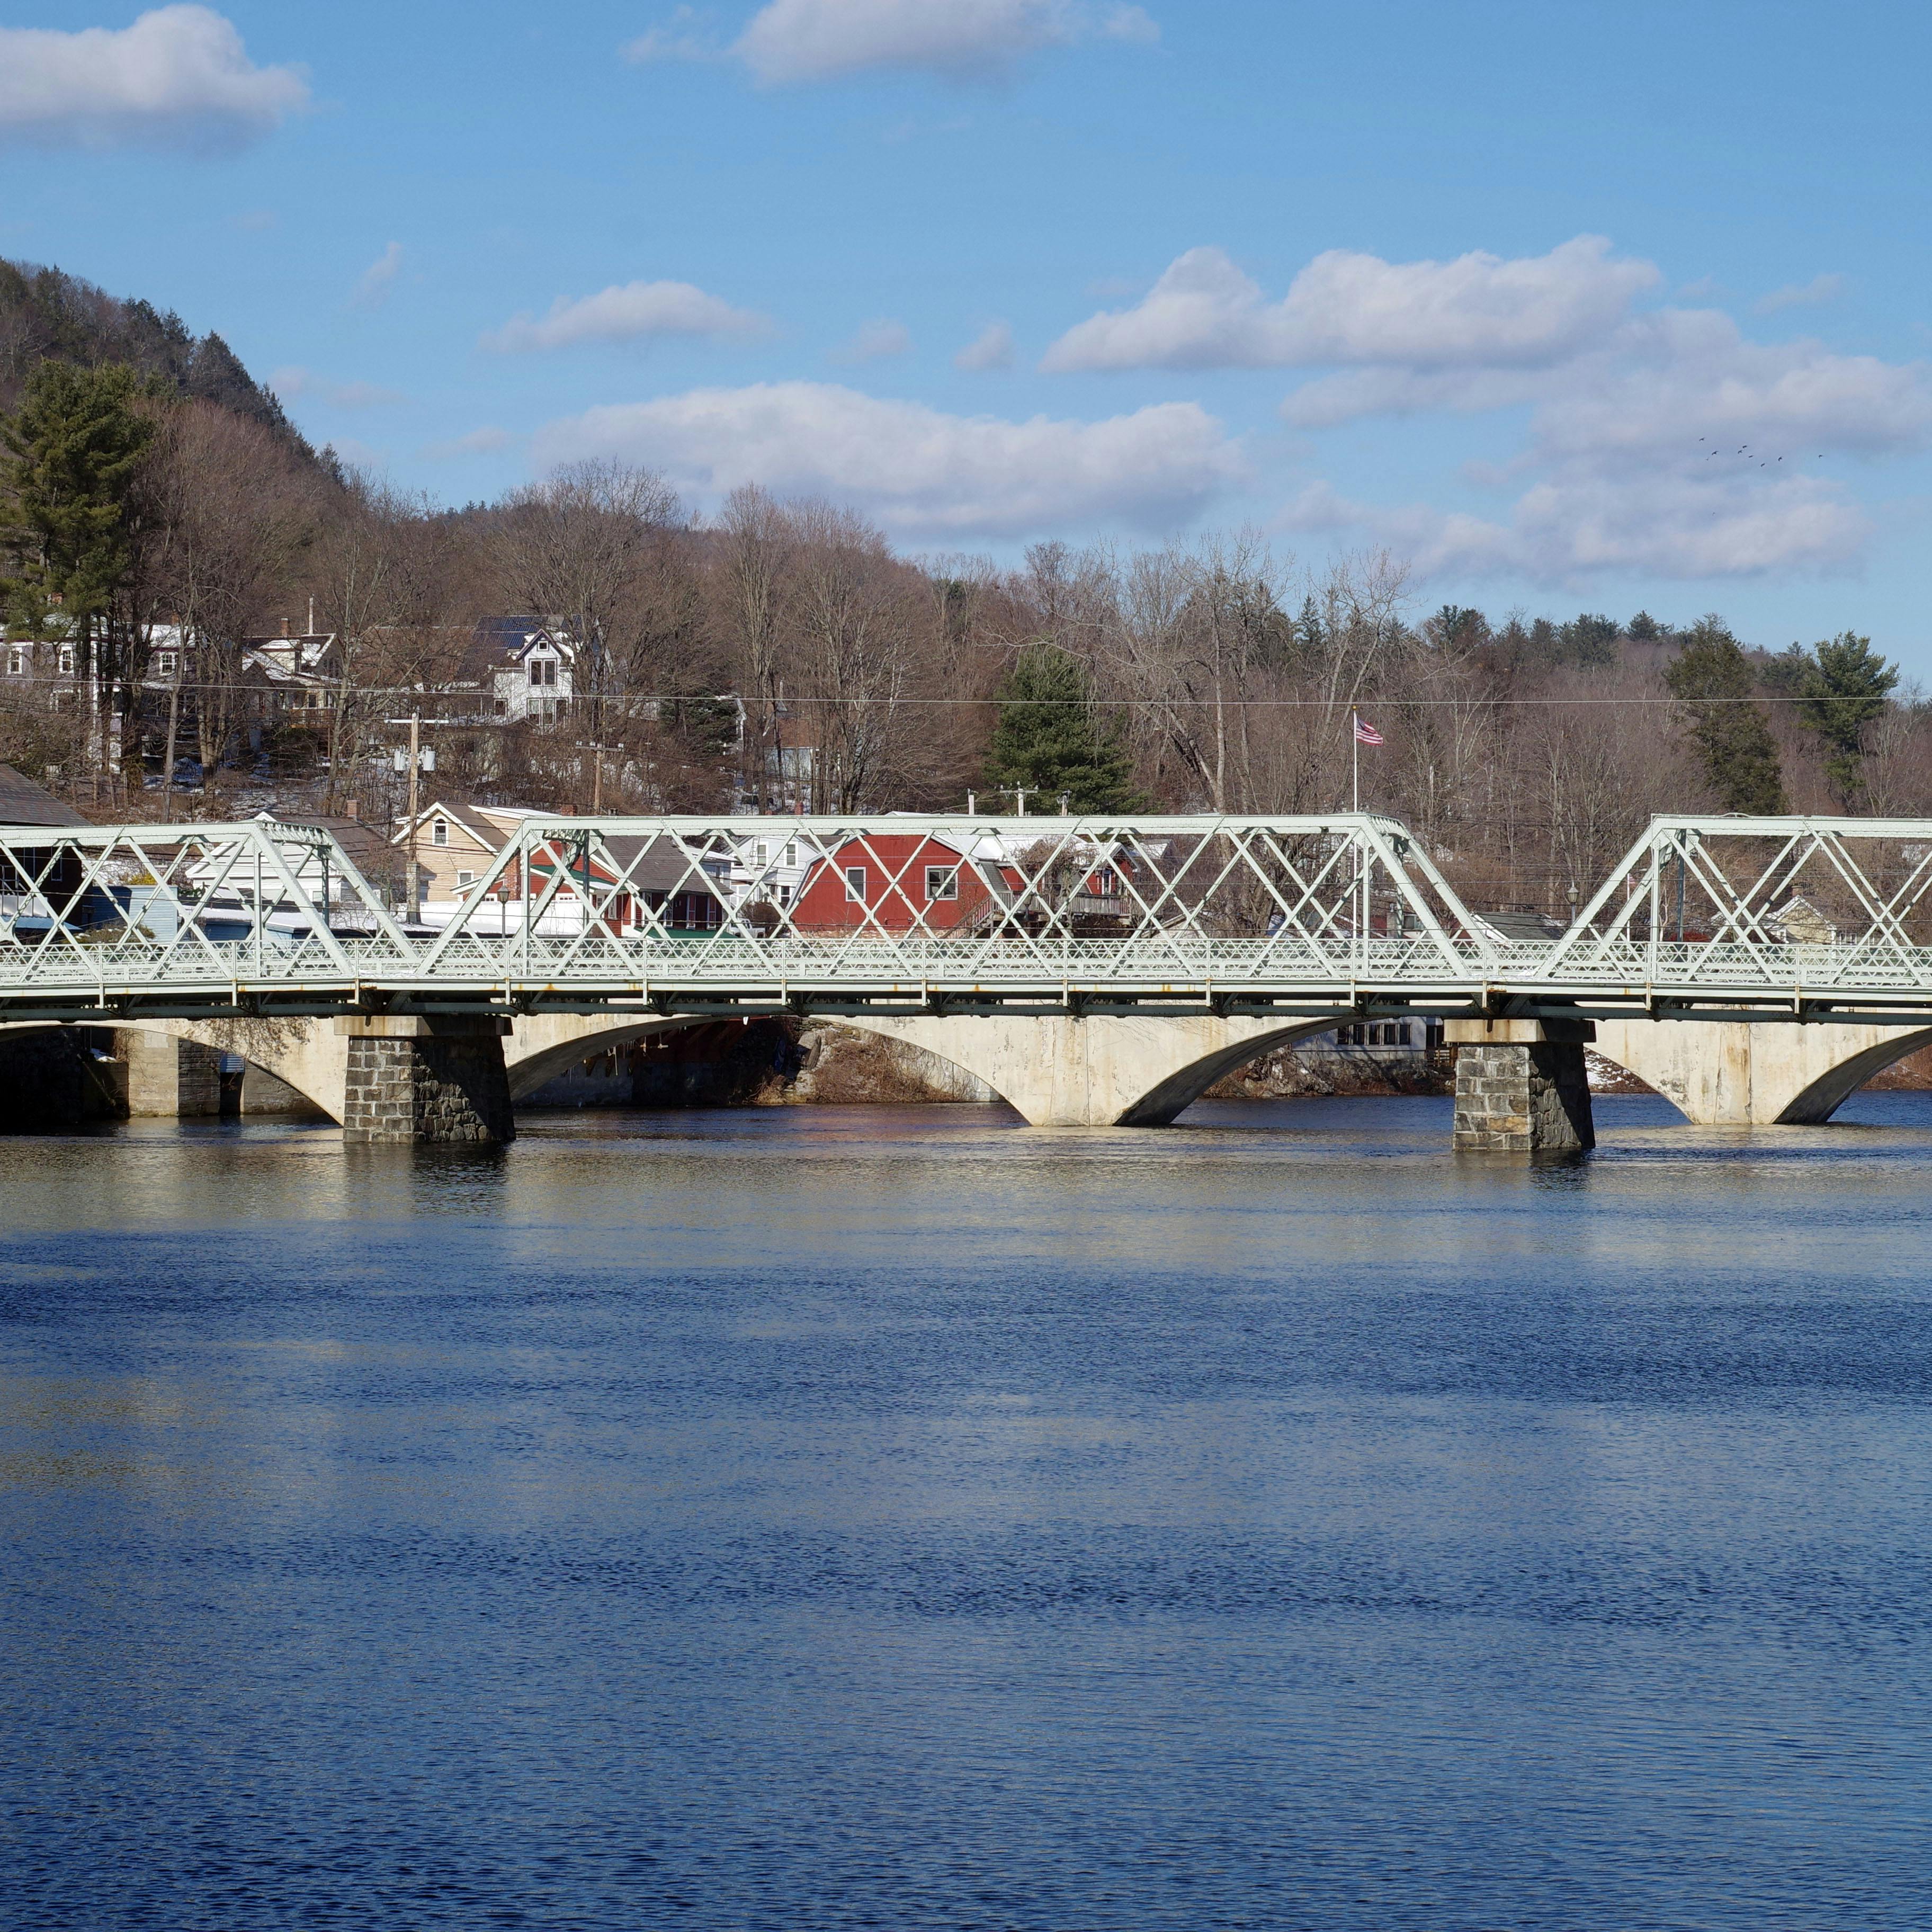 looking over a river at a truss bridge in the foreground and an arch bridge in the background